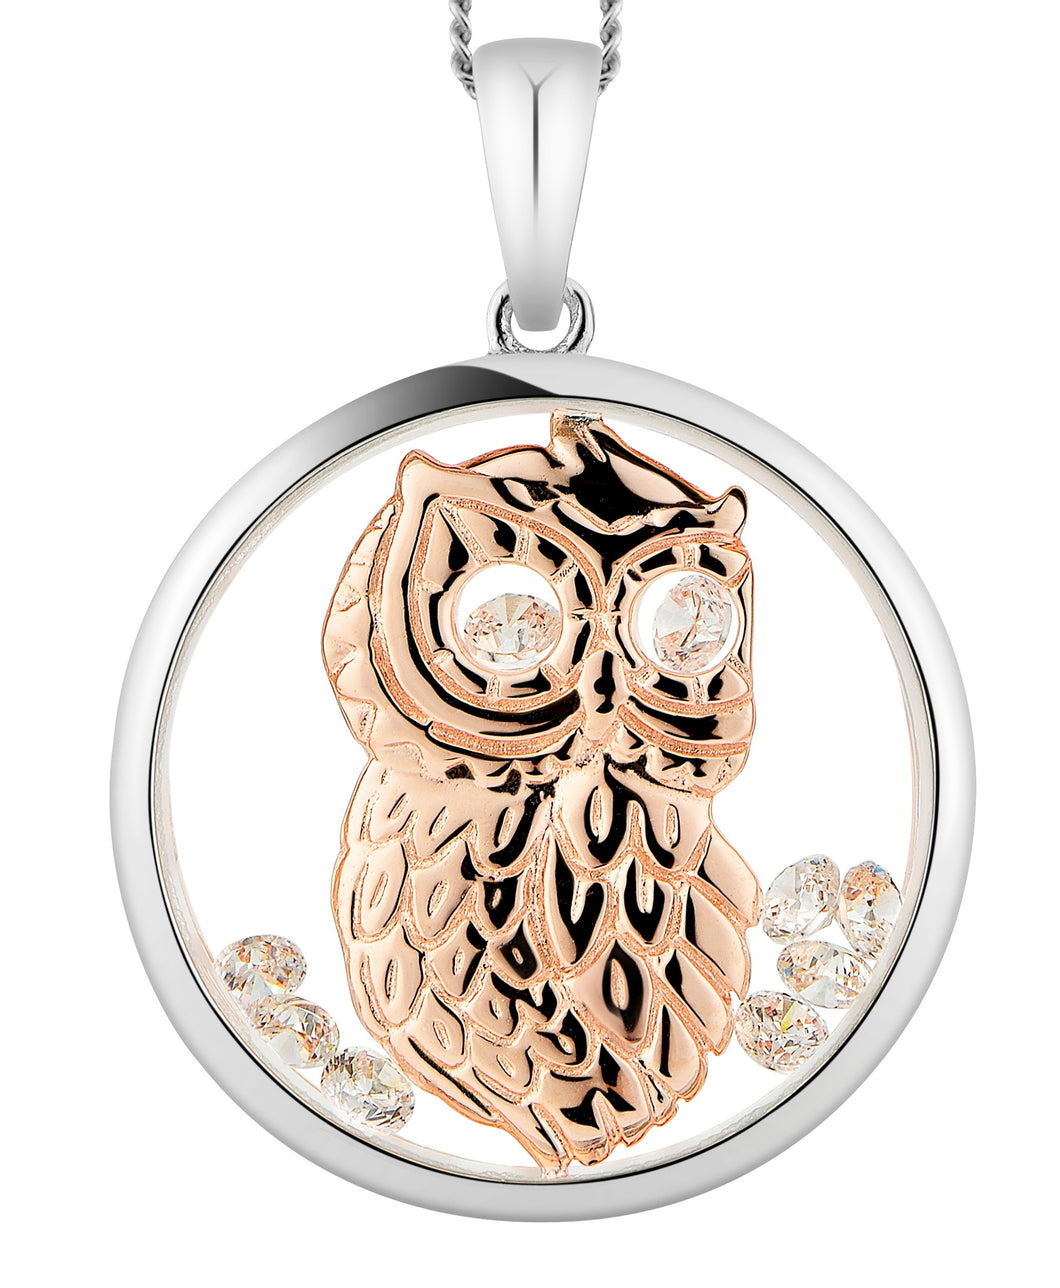 330993 ASTRA Sterling Silver Rose Gold Plated Wise Owl Pendant 20mm